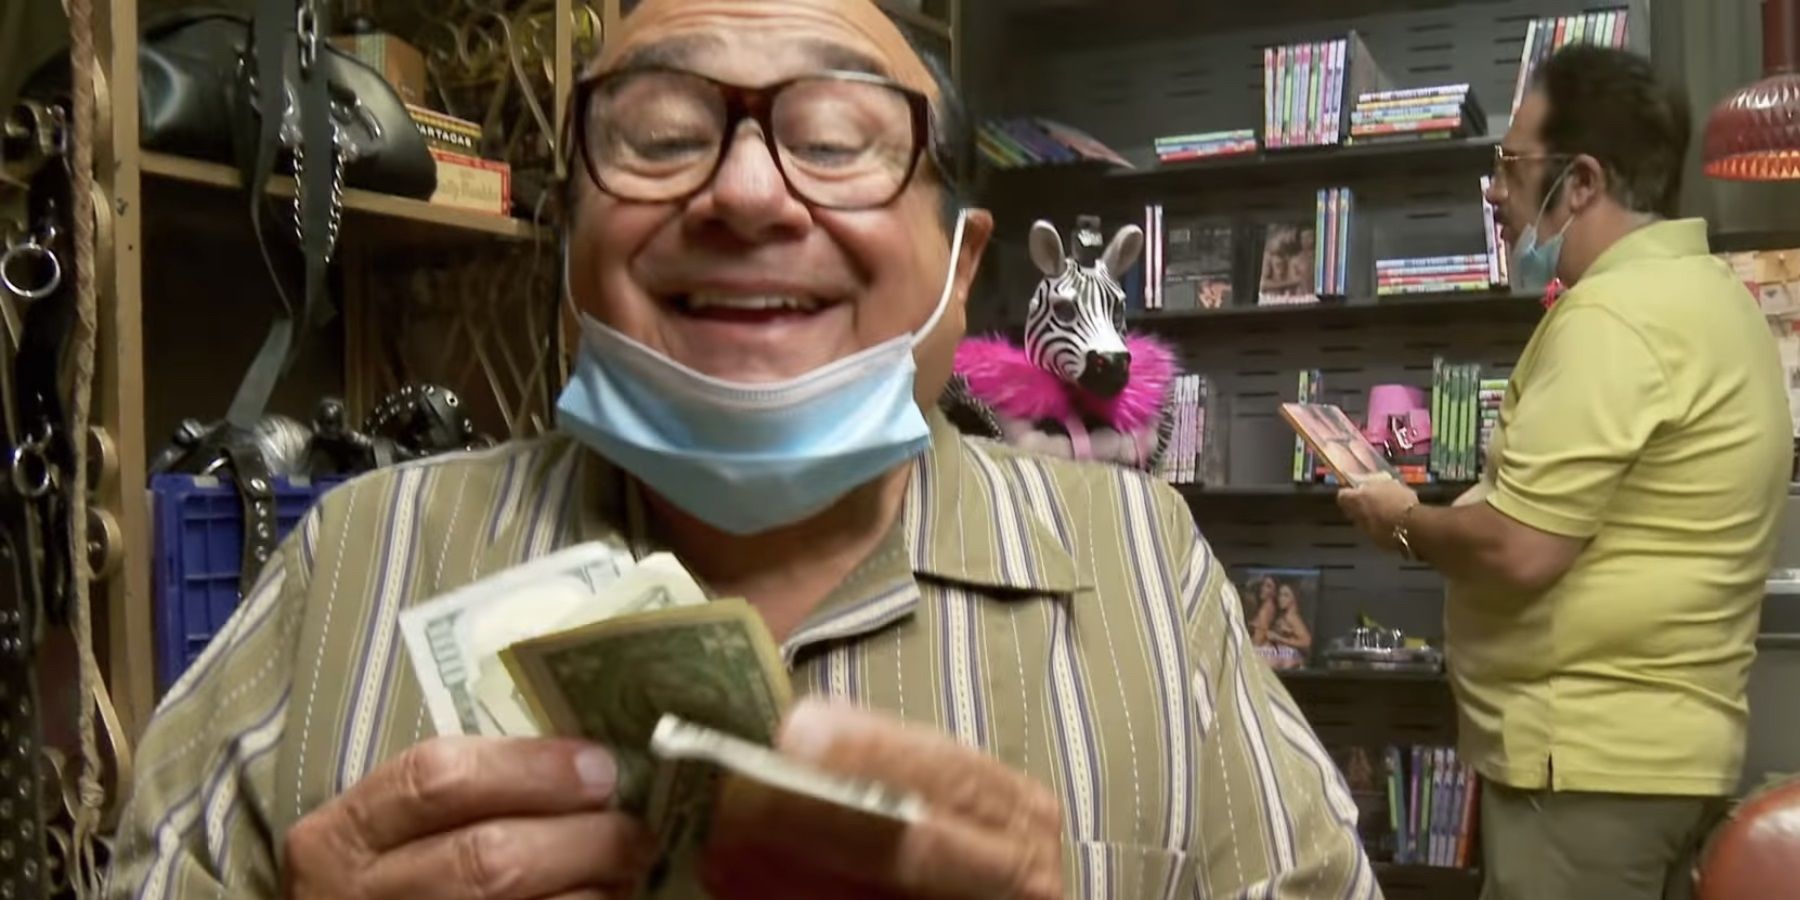 Frank counting money in It's Always Sunny